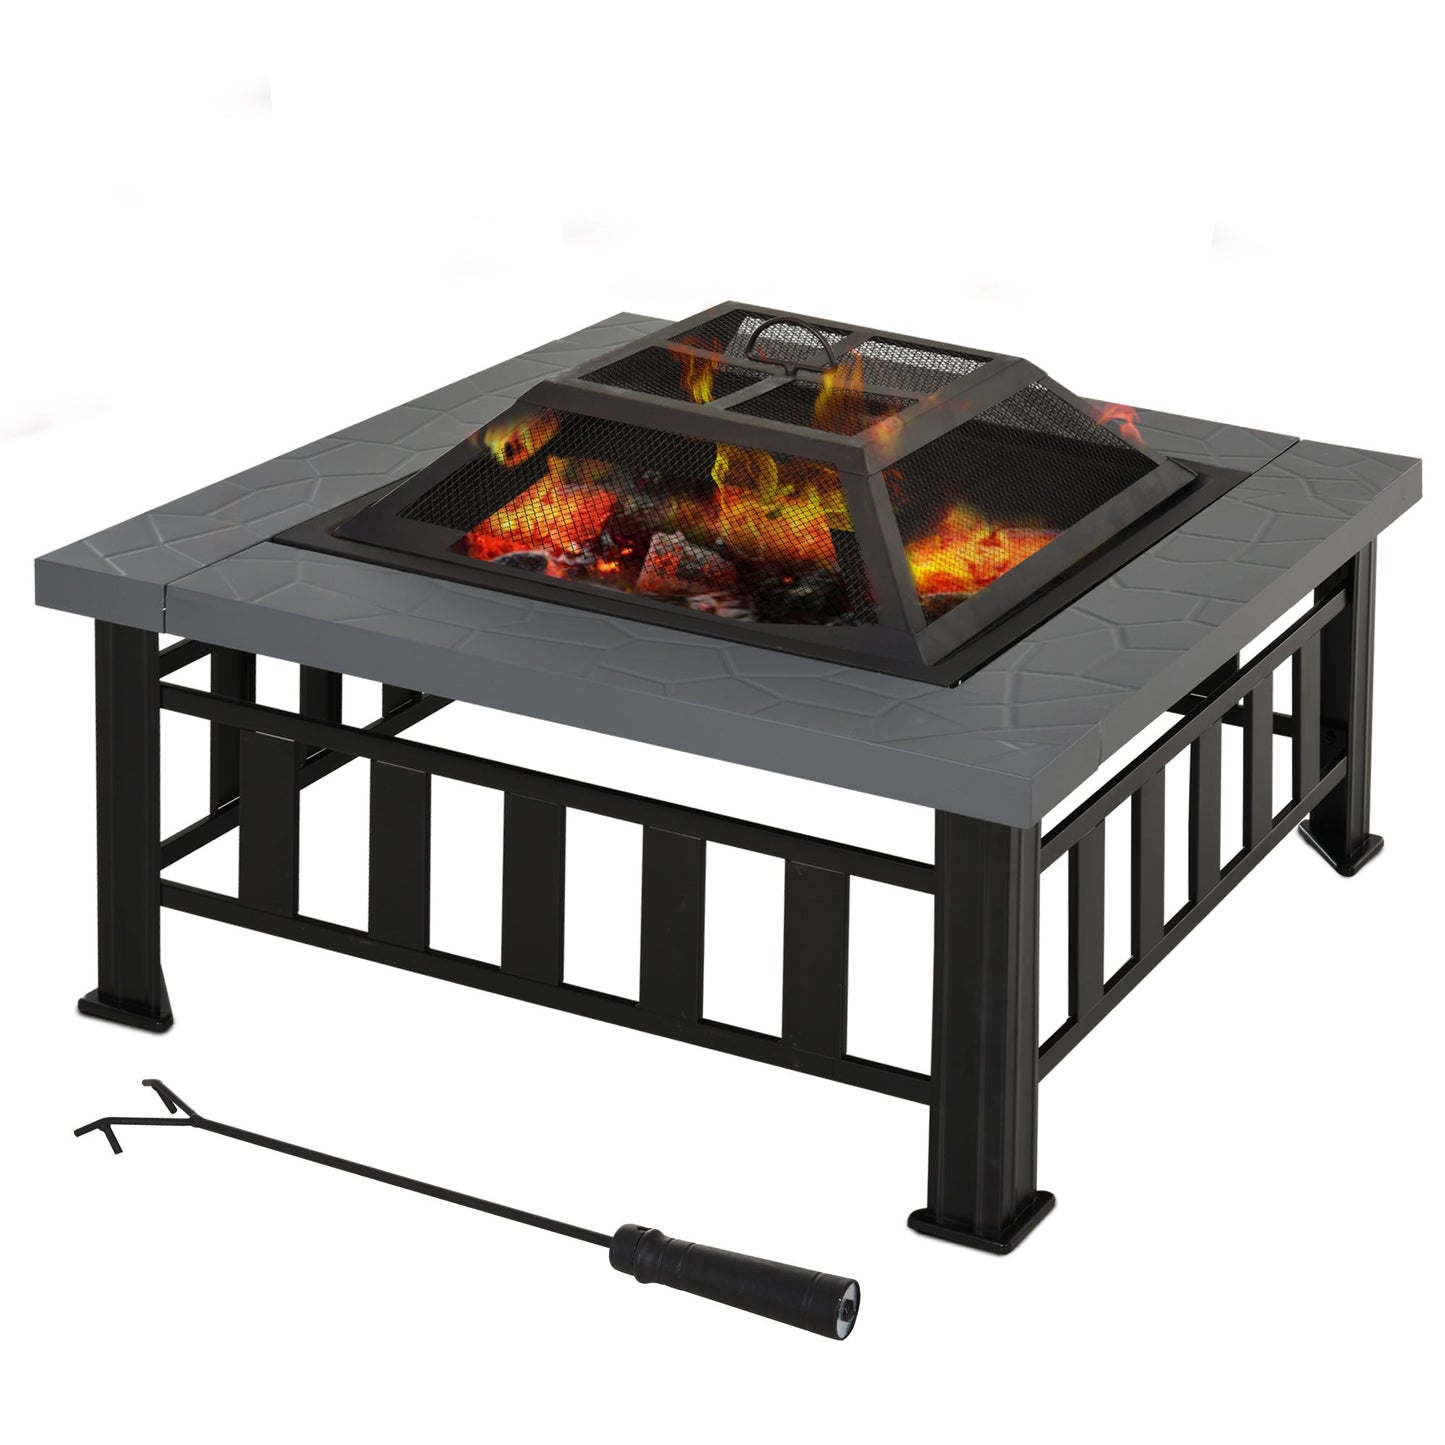 Outdoor and Garden-34" Outdoor Fire Pit Square Steel Wood Burning Firepit Bowl with Spark Screen, Waterproof Cover, Log Grate, Poker for Camping, BBQ, Bonfire - Outdoor Style Company